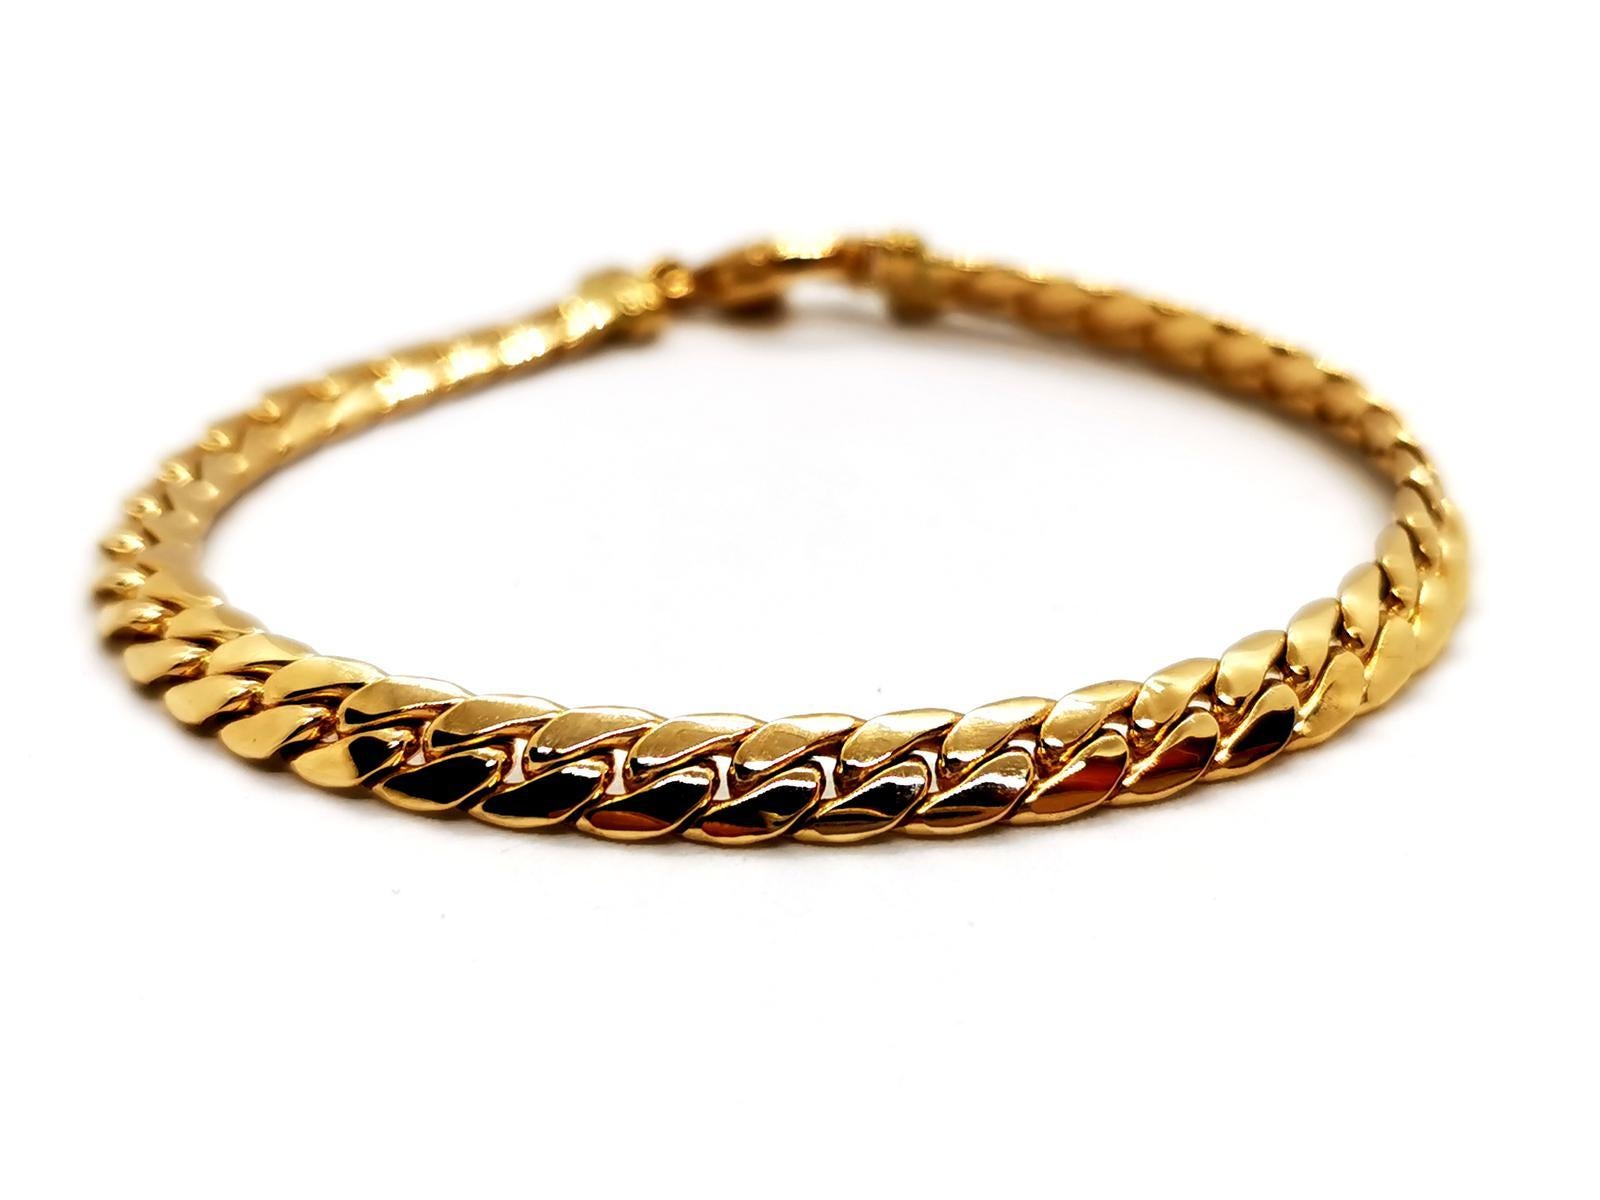 Bracelet Yellow Gold 750 thousandths massive English mesh. length: 18 cm. width: 0.52 cm. thickness: 0.19 cm. total weight: 18.31 g. eagle punch head. excellent condition
